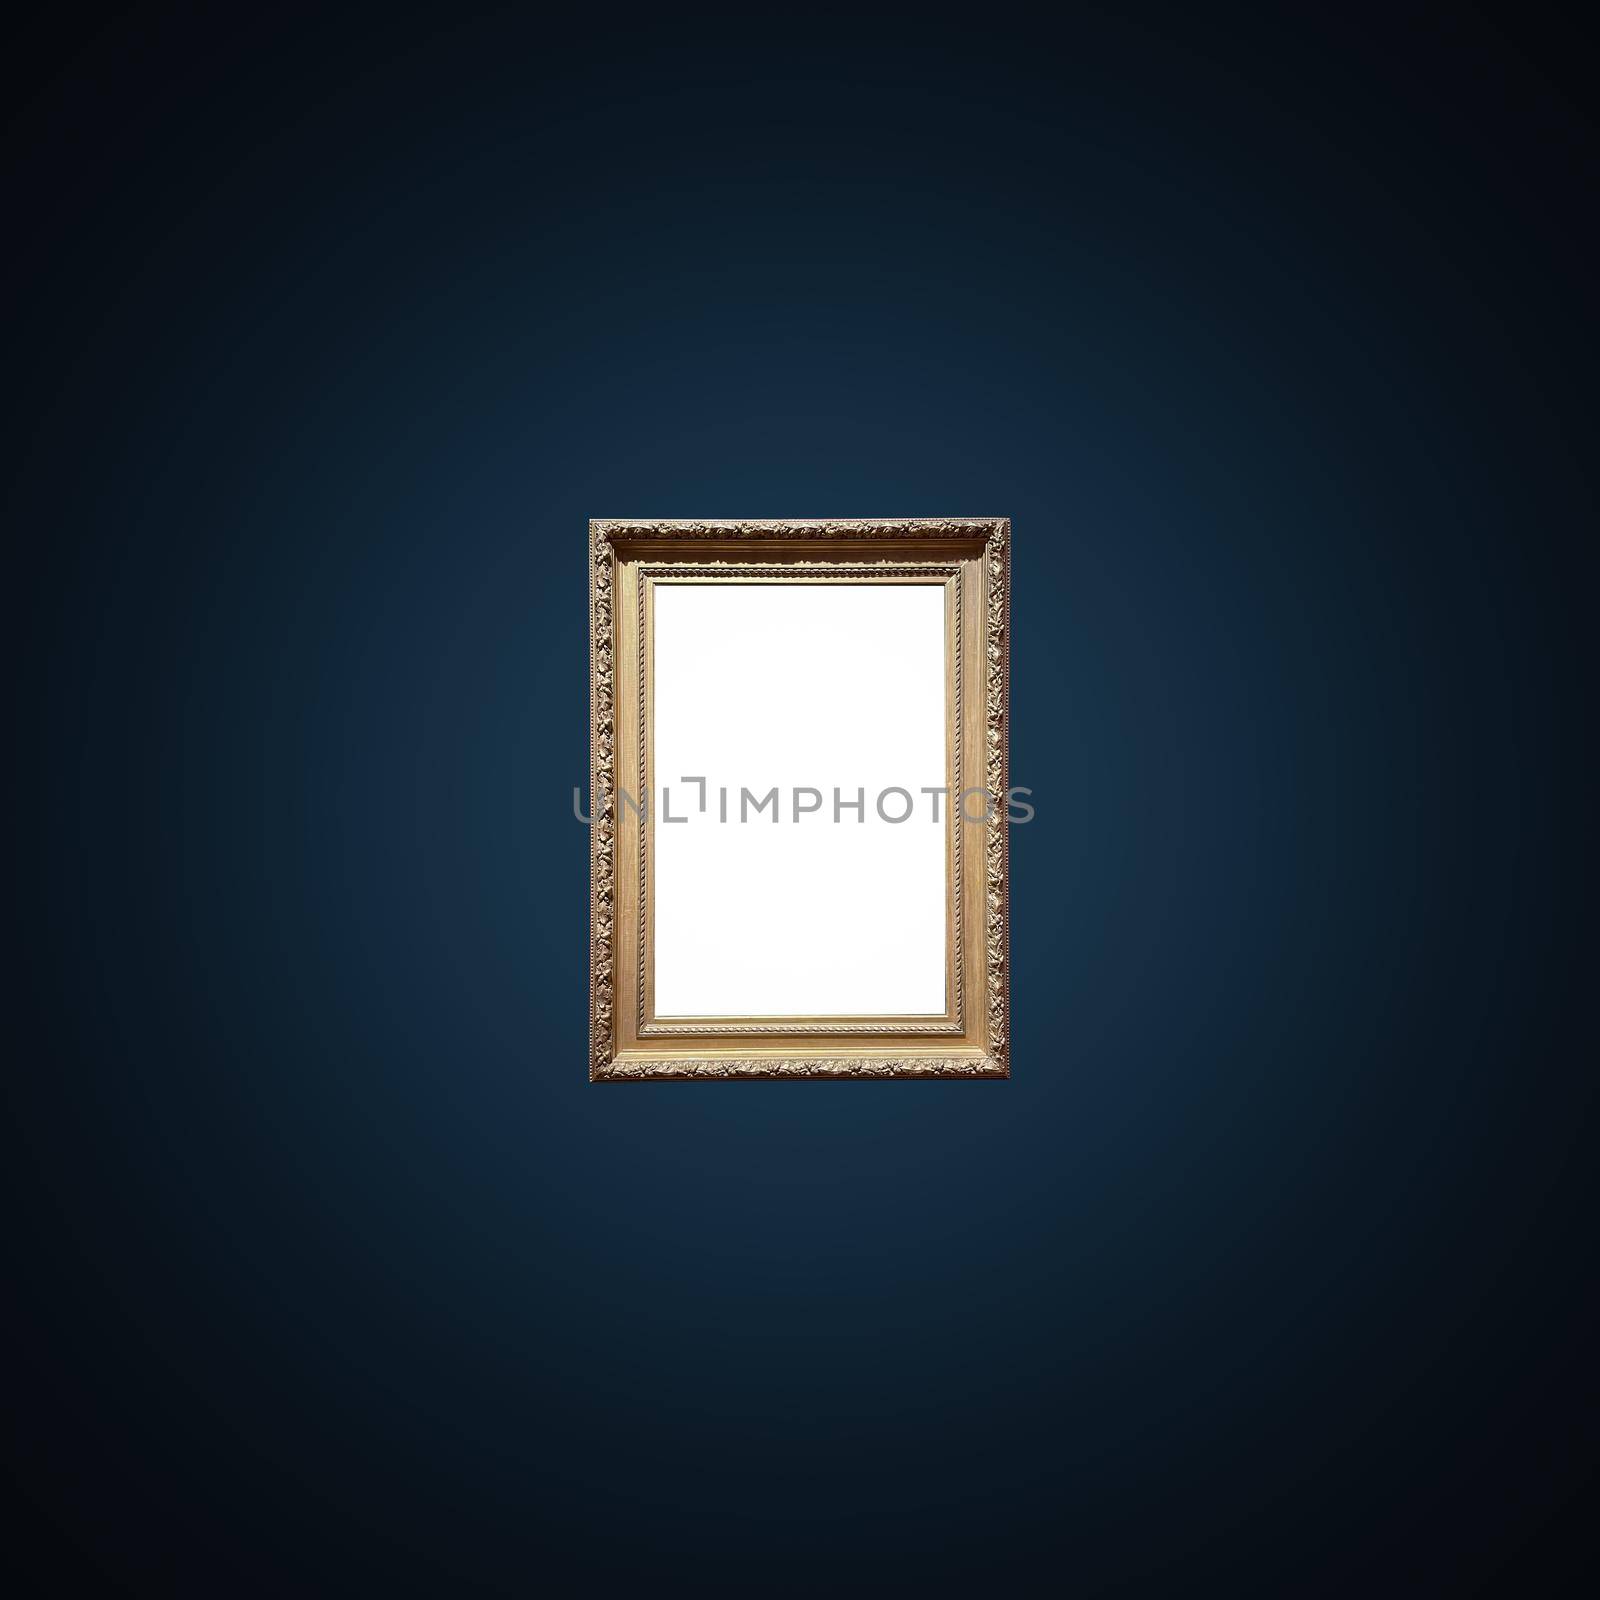 Antique art fair gallery frame on royal blue wall at auction house or museum exhibition, blank template with empty white copyspace for mockup design, artwork by Anneleven